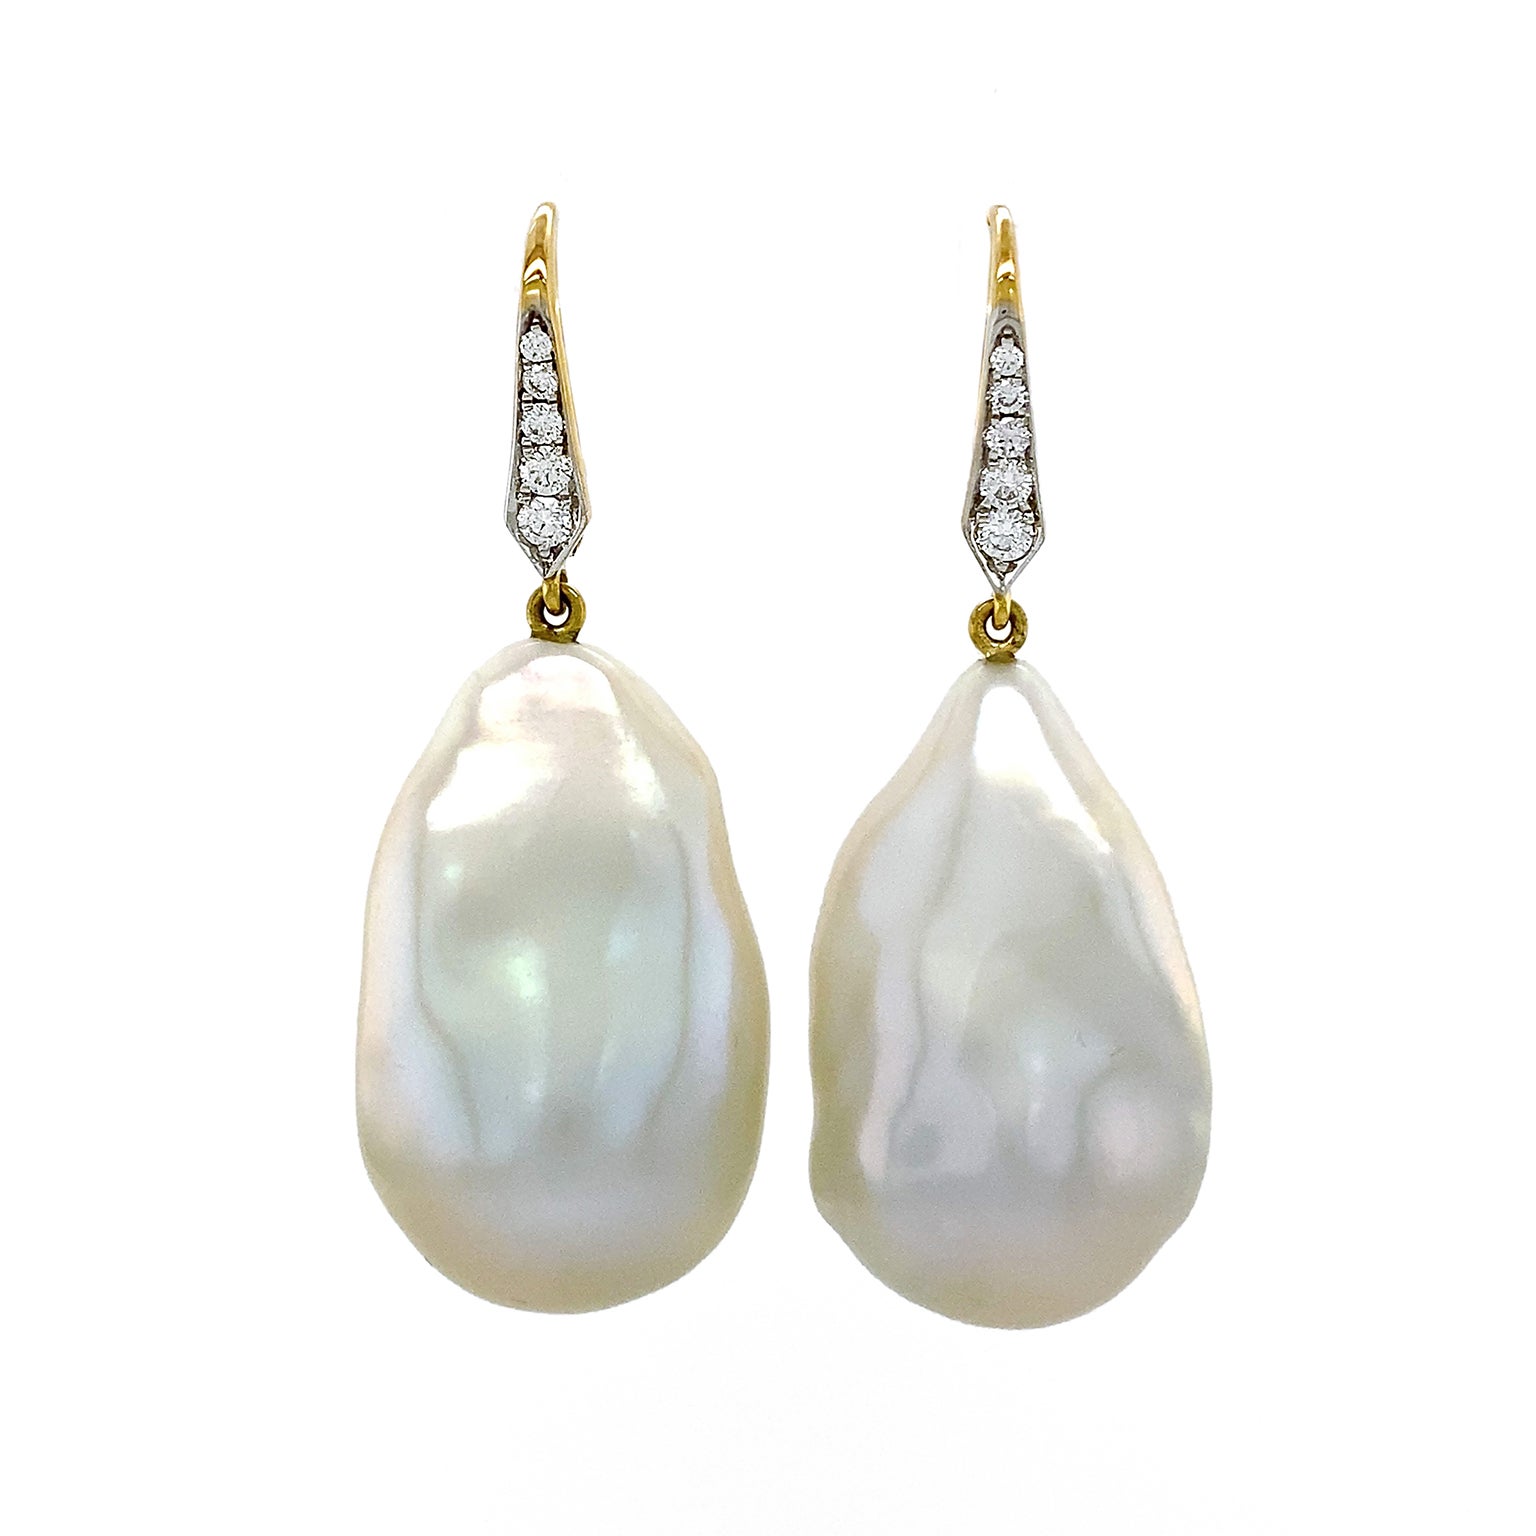 Glowing golden shades are released by these earrings. 18k yellow gold lever backs ornamented with brilliant cut diamonds secure an irregular shaped freshwater pearl. As the light falls on the ivory nacre bodies of the pearls, a unique satin